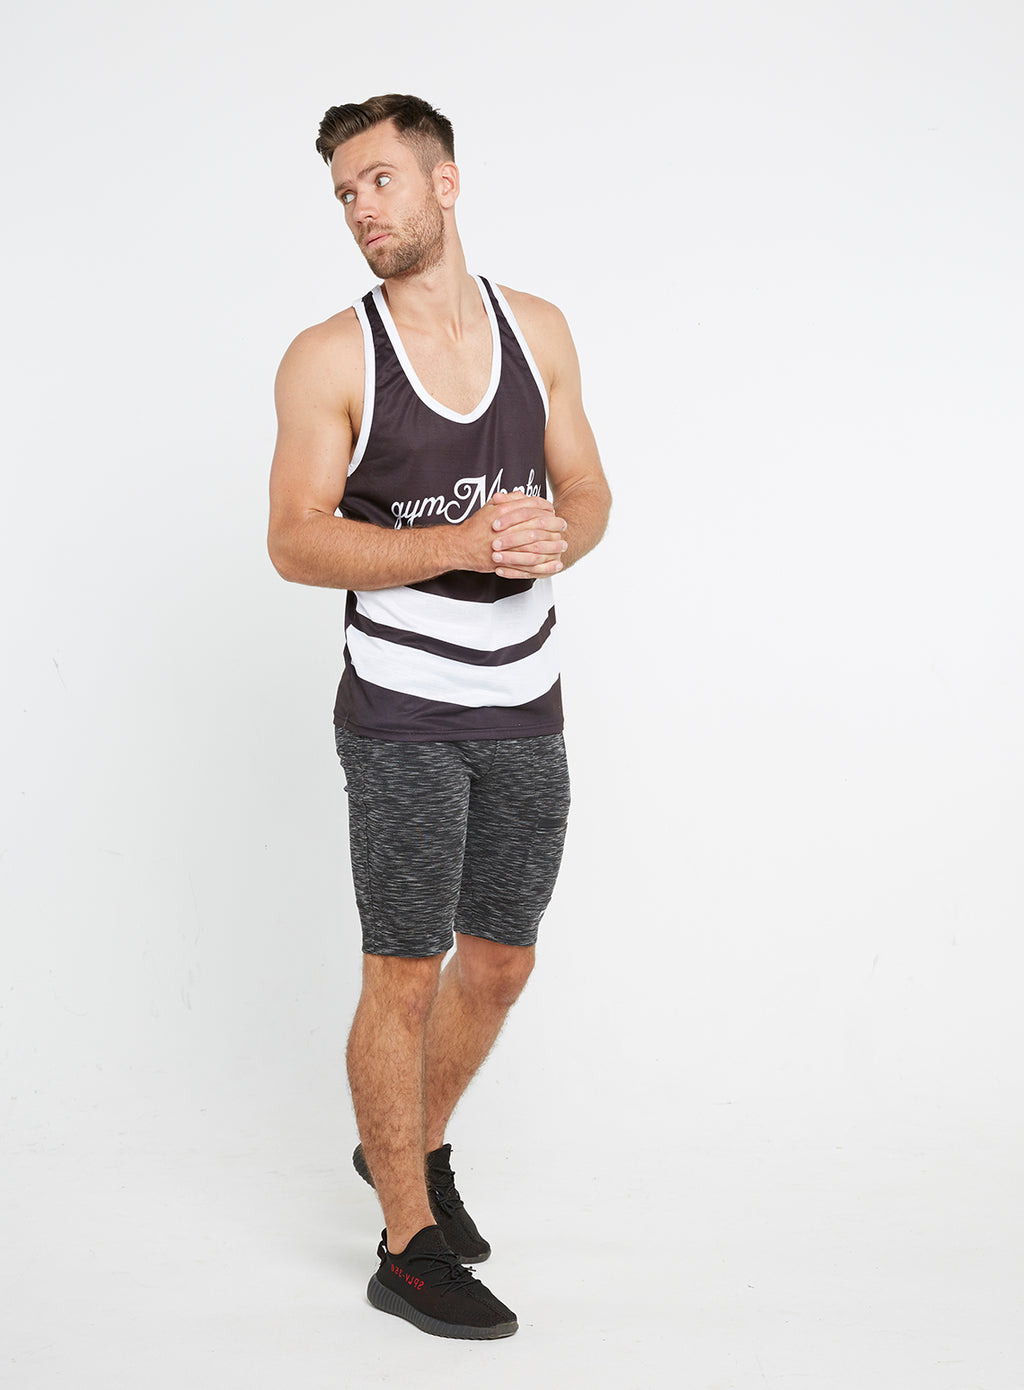 Gym Monkee -  Black and White Sublimated Vest MOVING